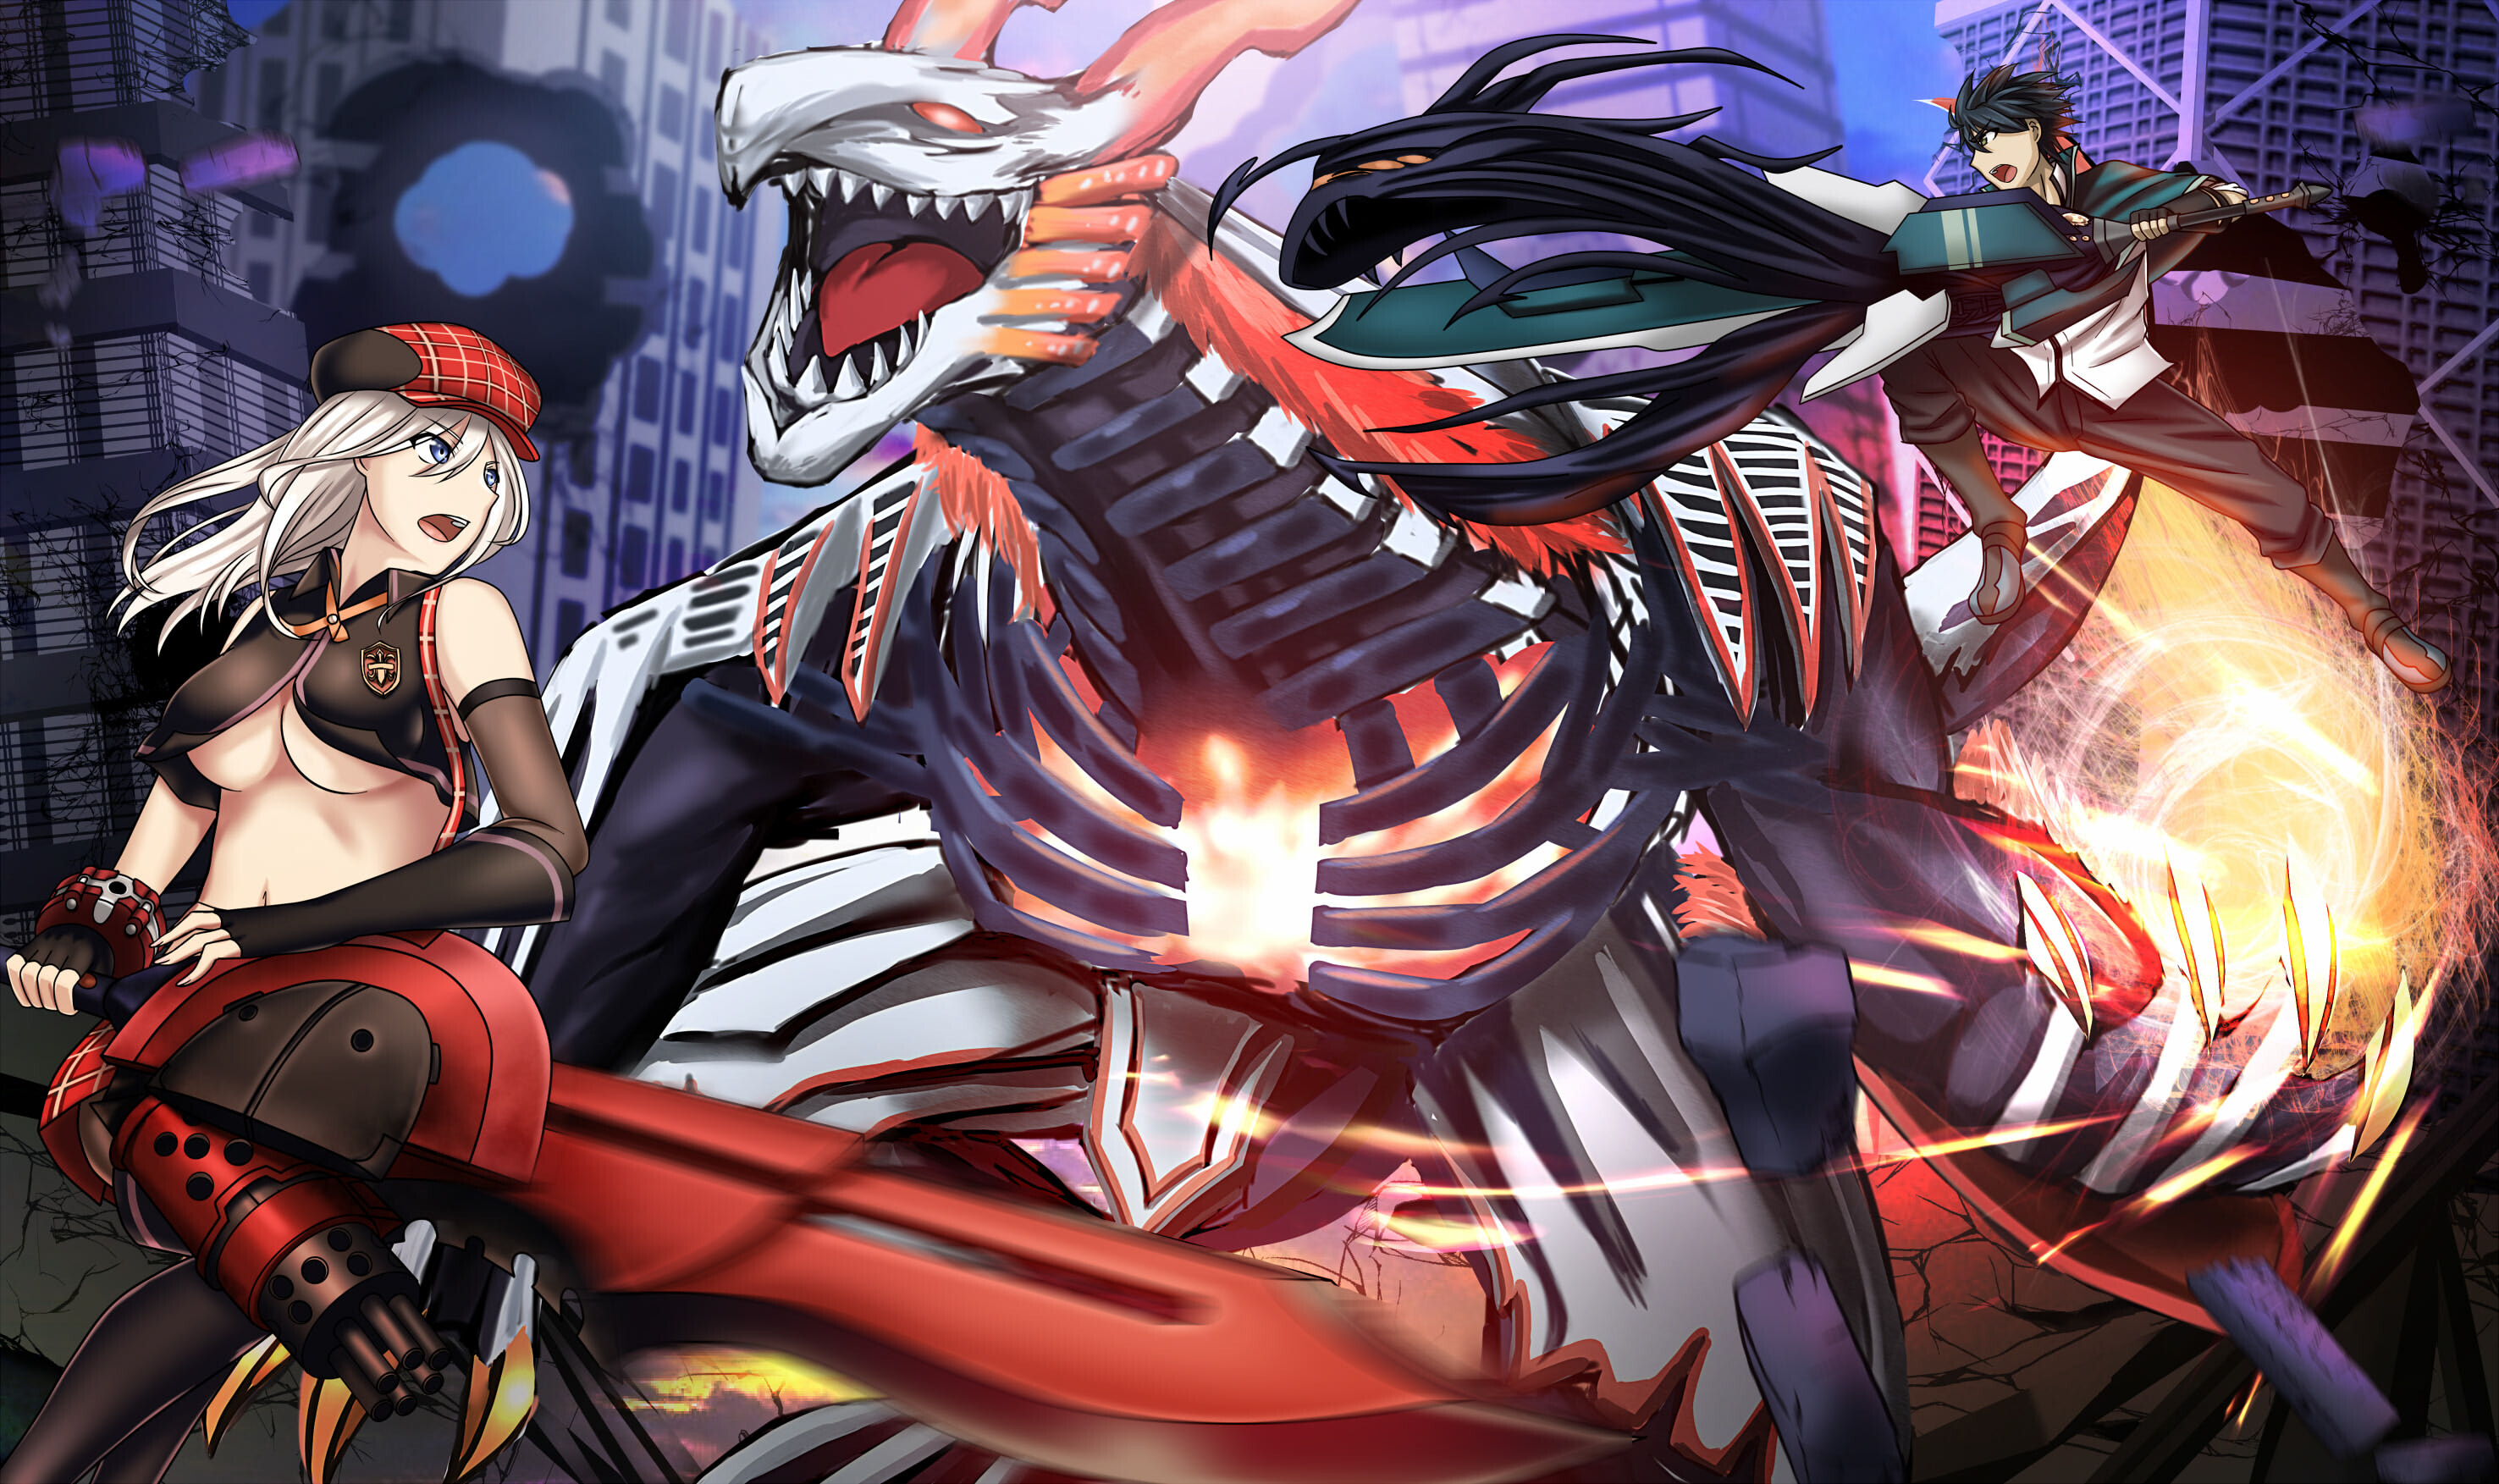 God Eater (TV series), HD wallpapers, Anime characters, Vibrant backgrounds, 2960x1760 HD Desktop